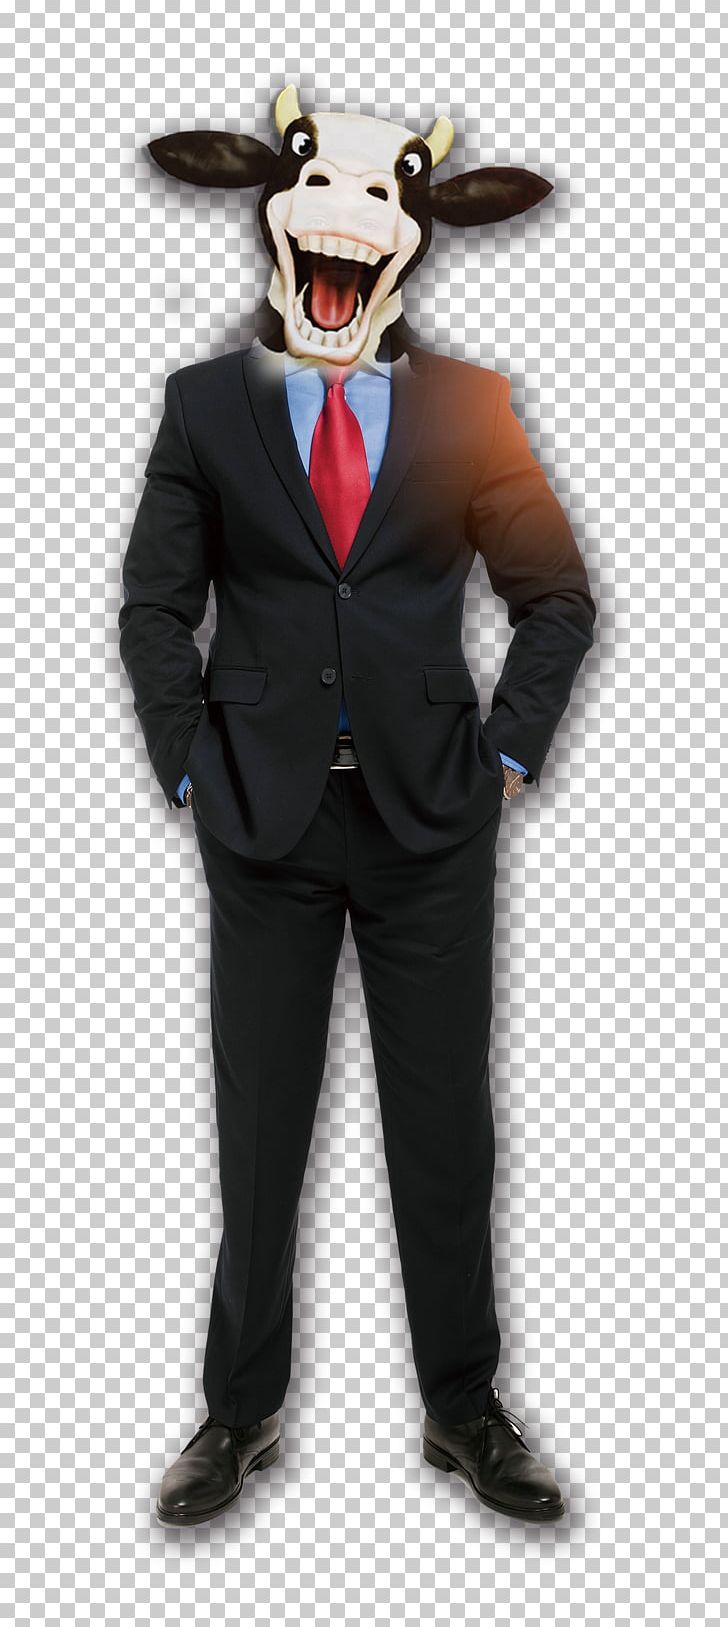 Businessperson Suit Icon PNG, Clipart, Business, Businessman, Businessman Cartoon, Cartoon Businessman, Cattle Free PNG Download